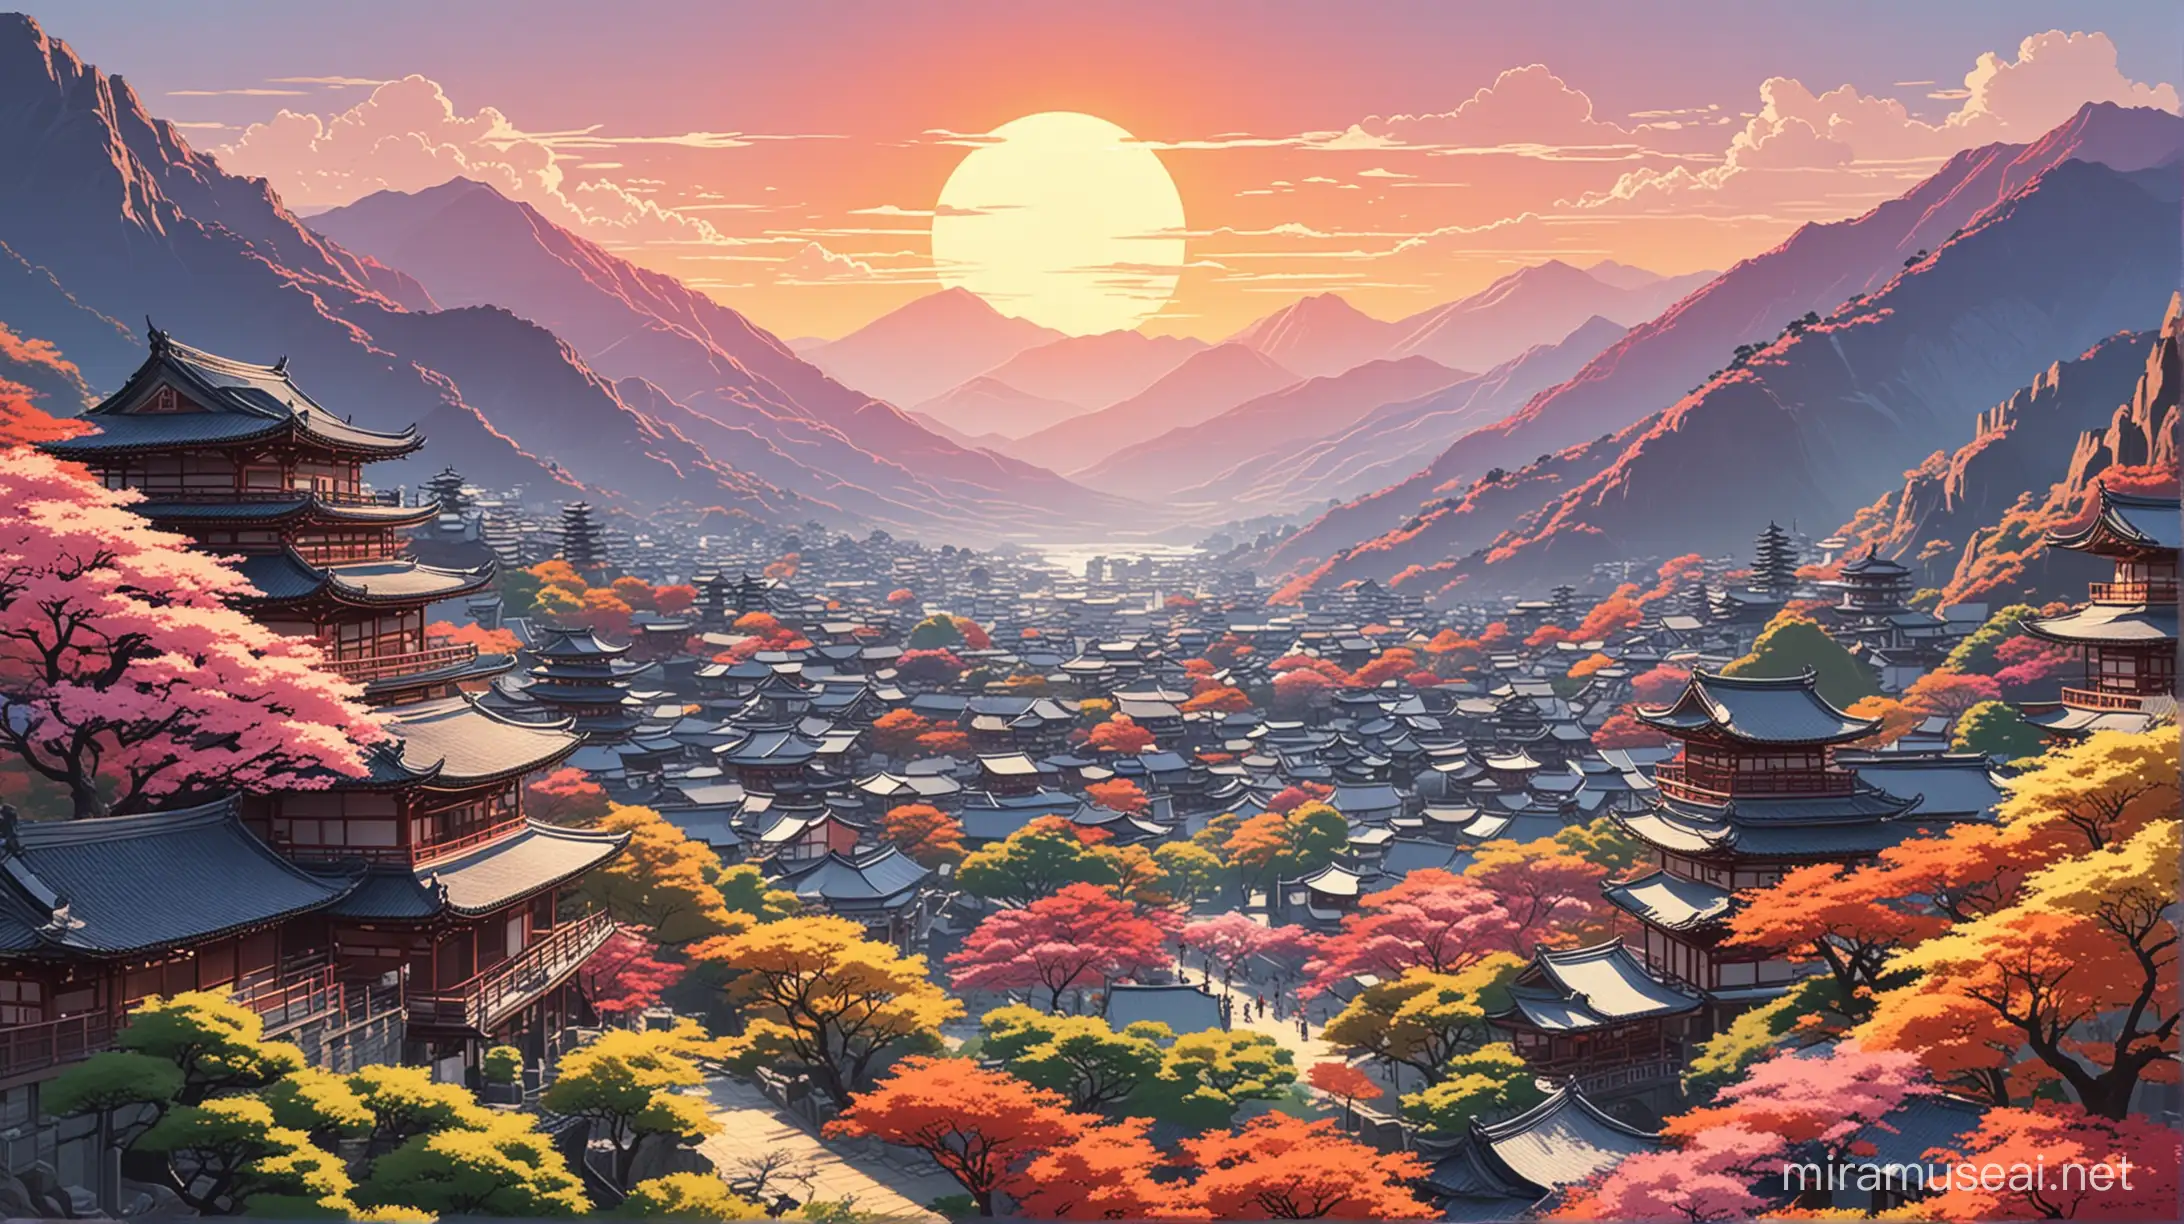 Scenic View of Ancient Japanese City with Colorful Sun and Mountain Silhouettes